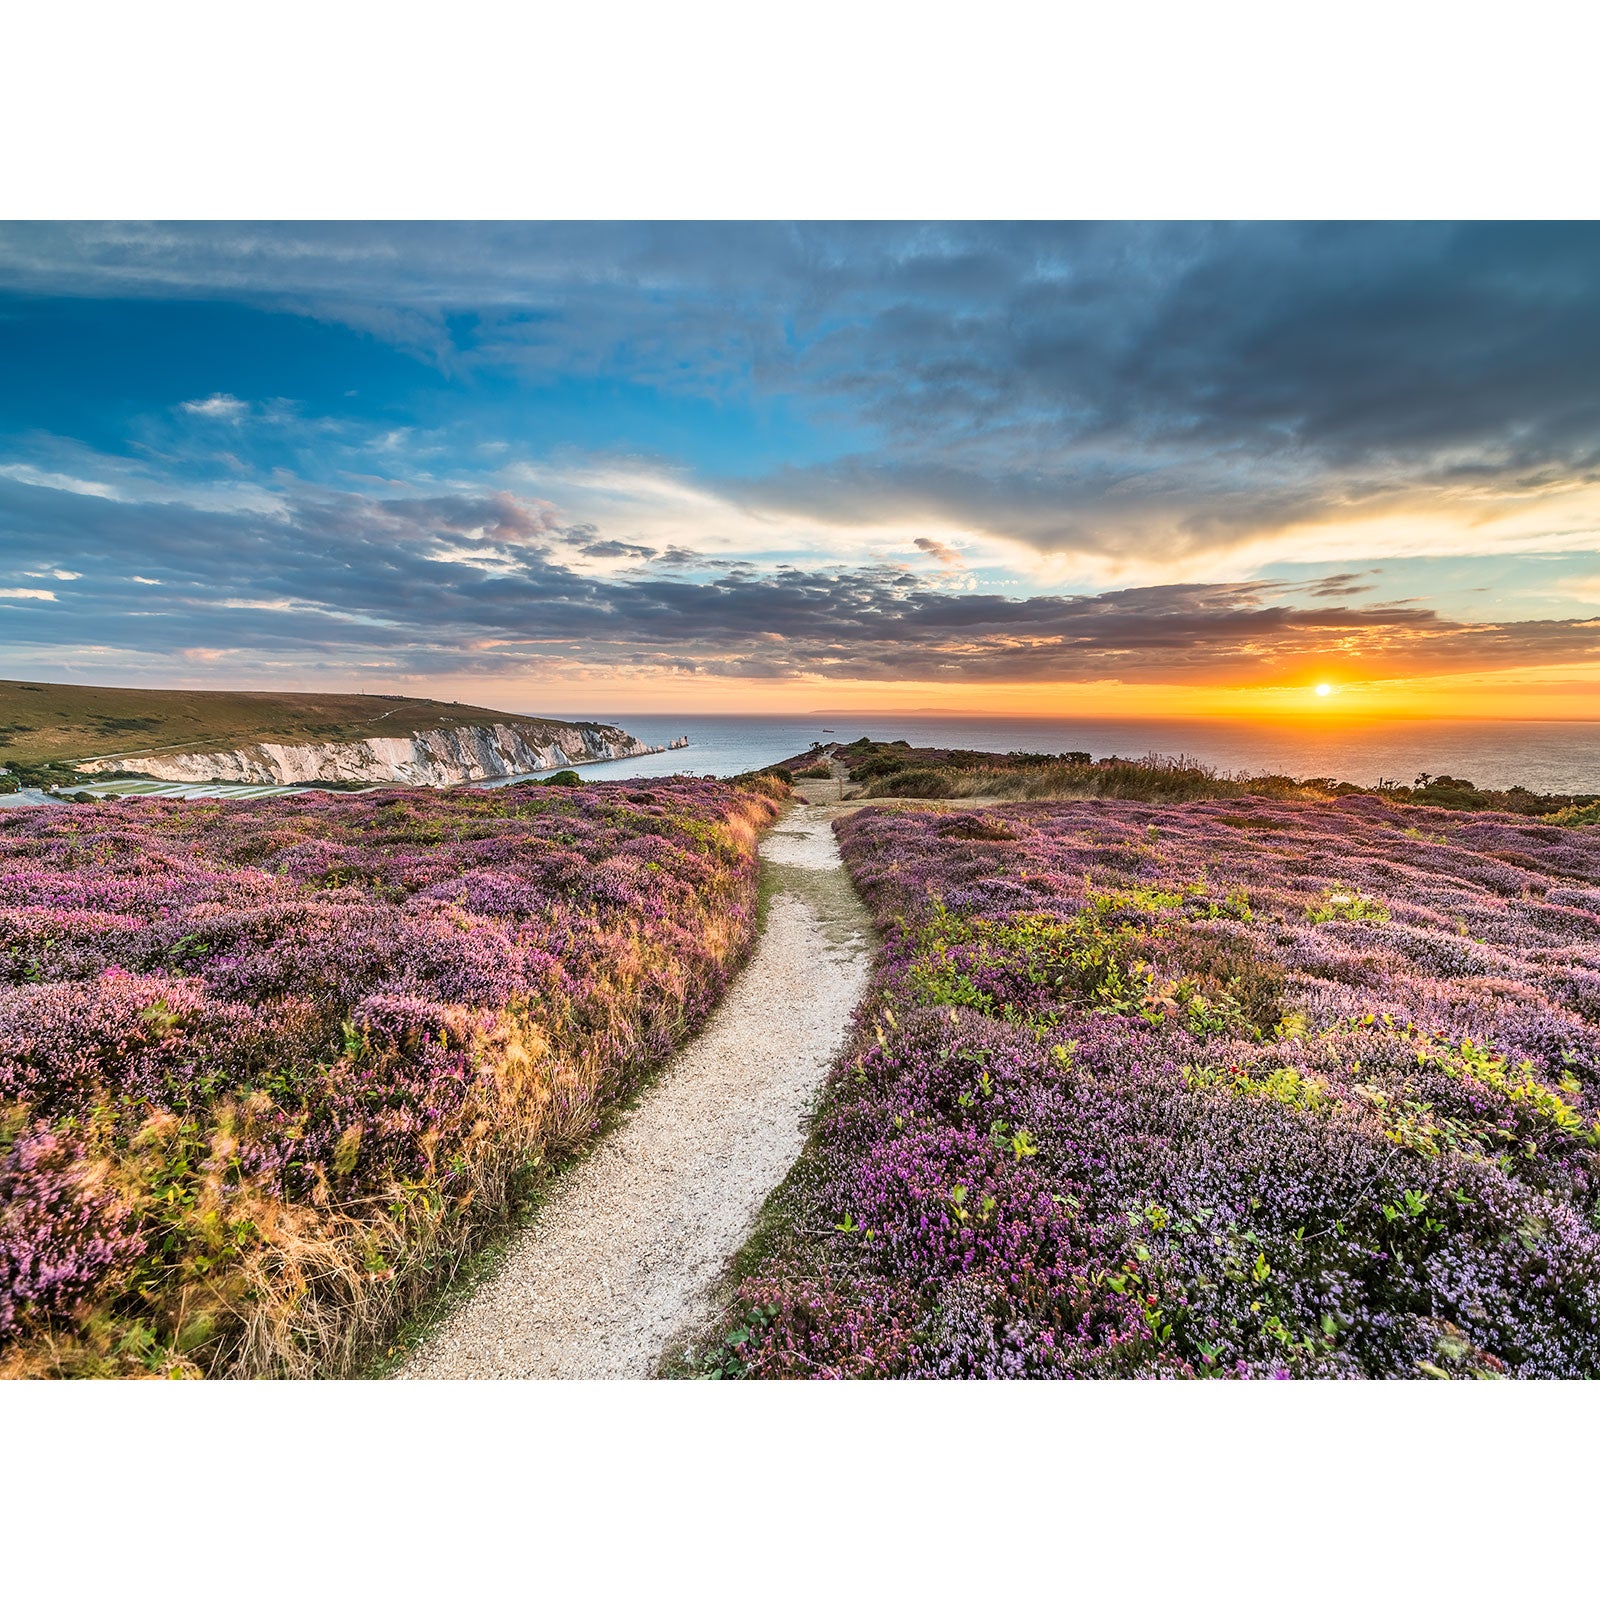 A scenic coastal pathway through blooming heather at sunset on the Headon Warren by Available Light Photography on the Isle of Wight.